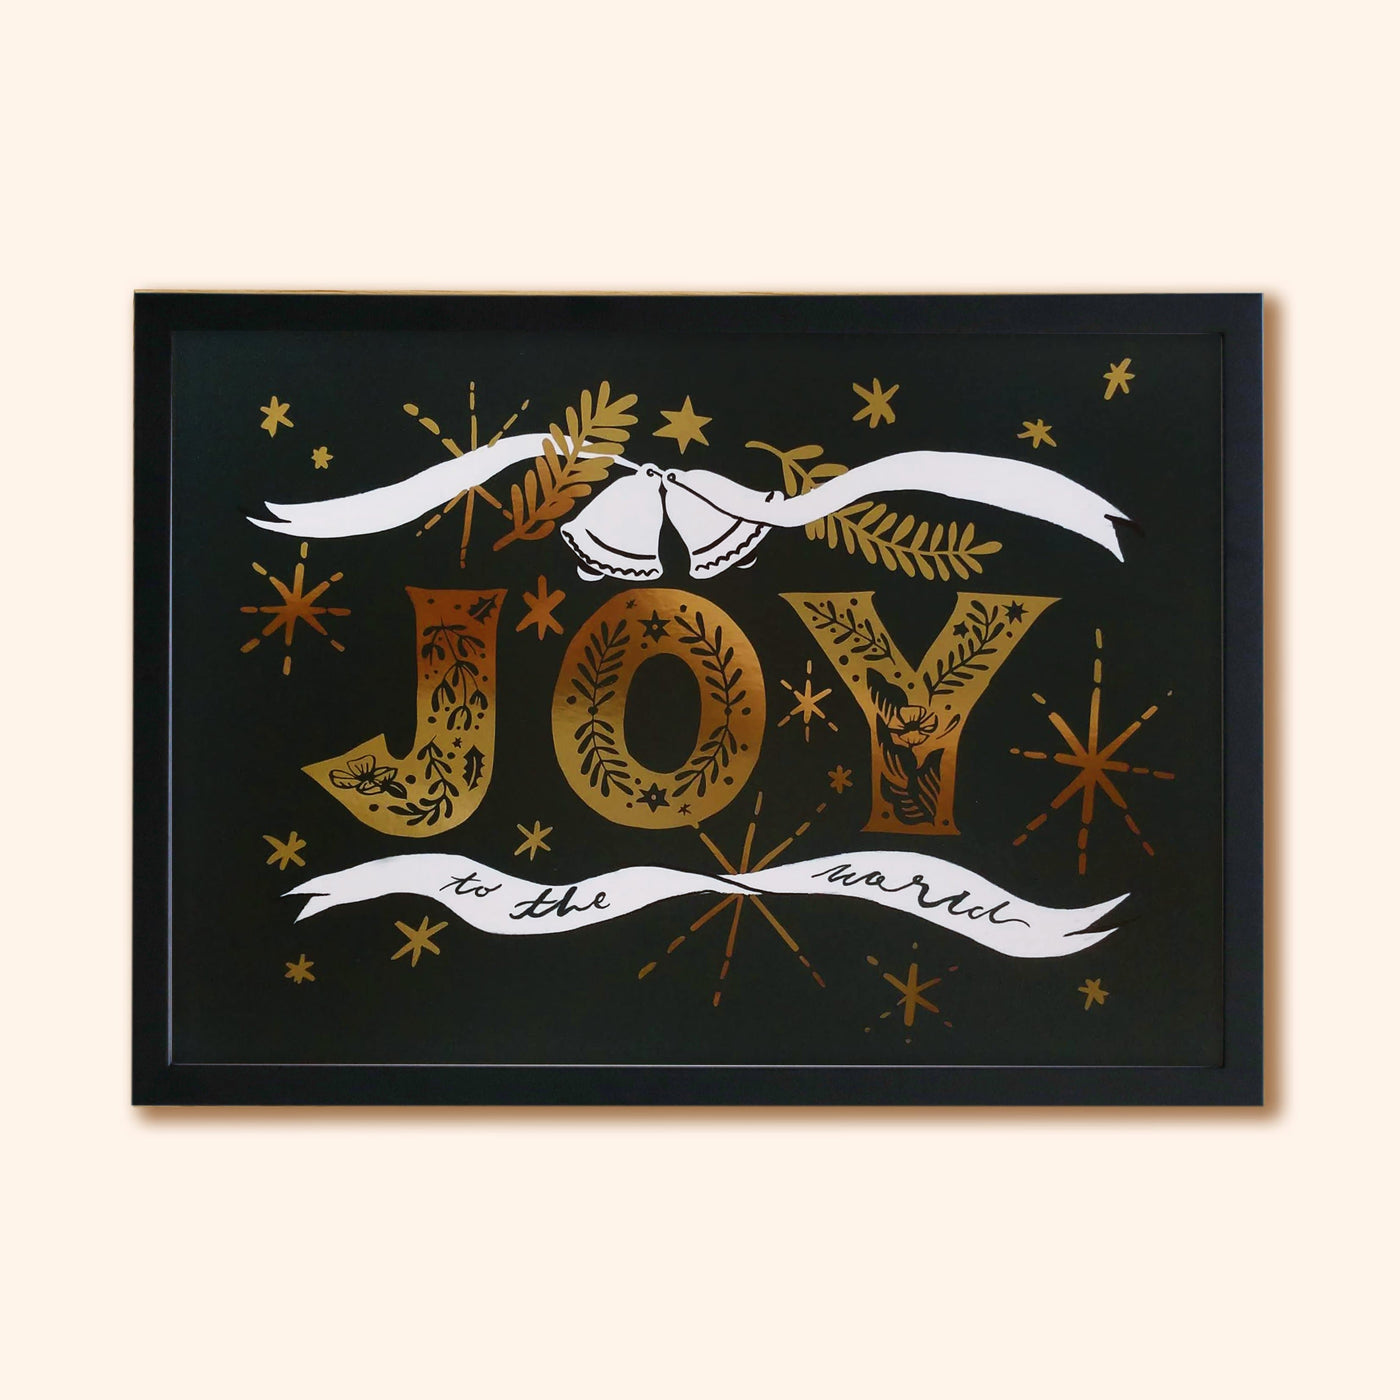 Navy Christmas Print With Gold Joy Lettering And Stars In A Black Frame - Annie Dornan Smith